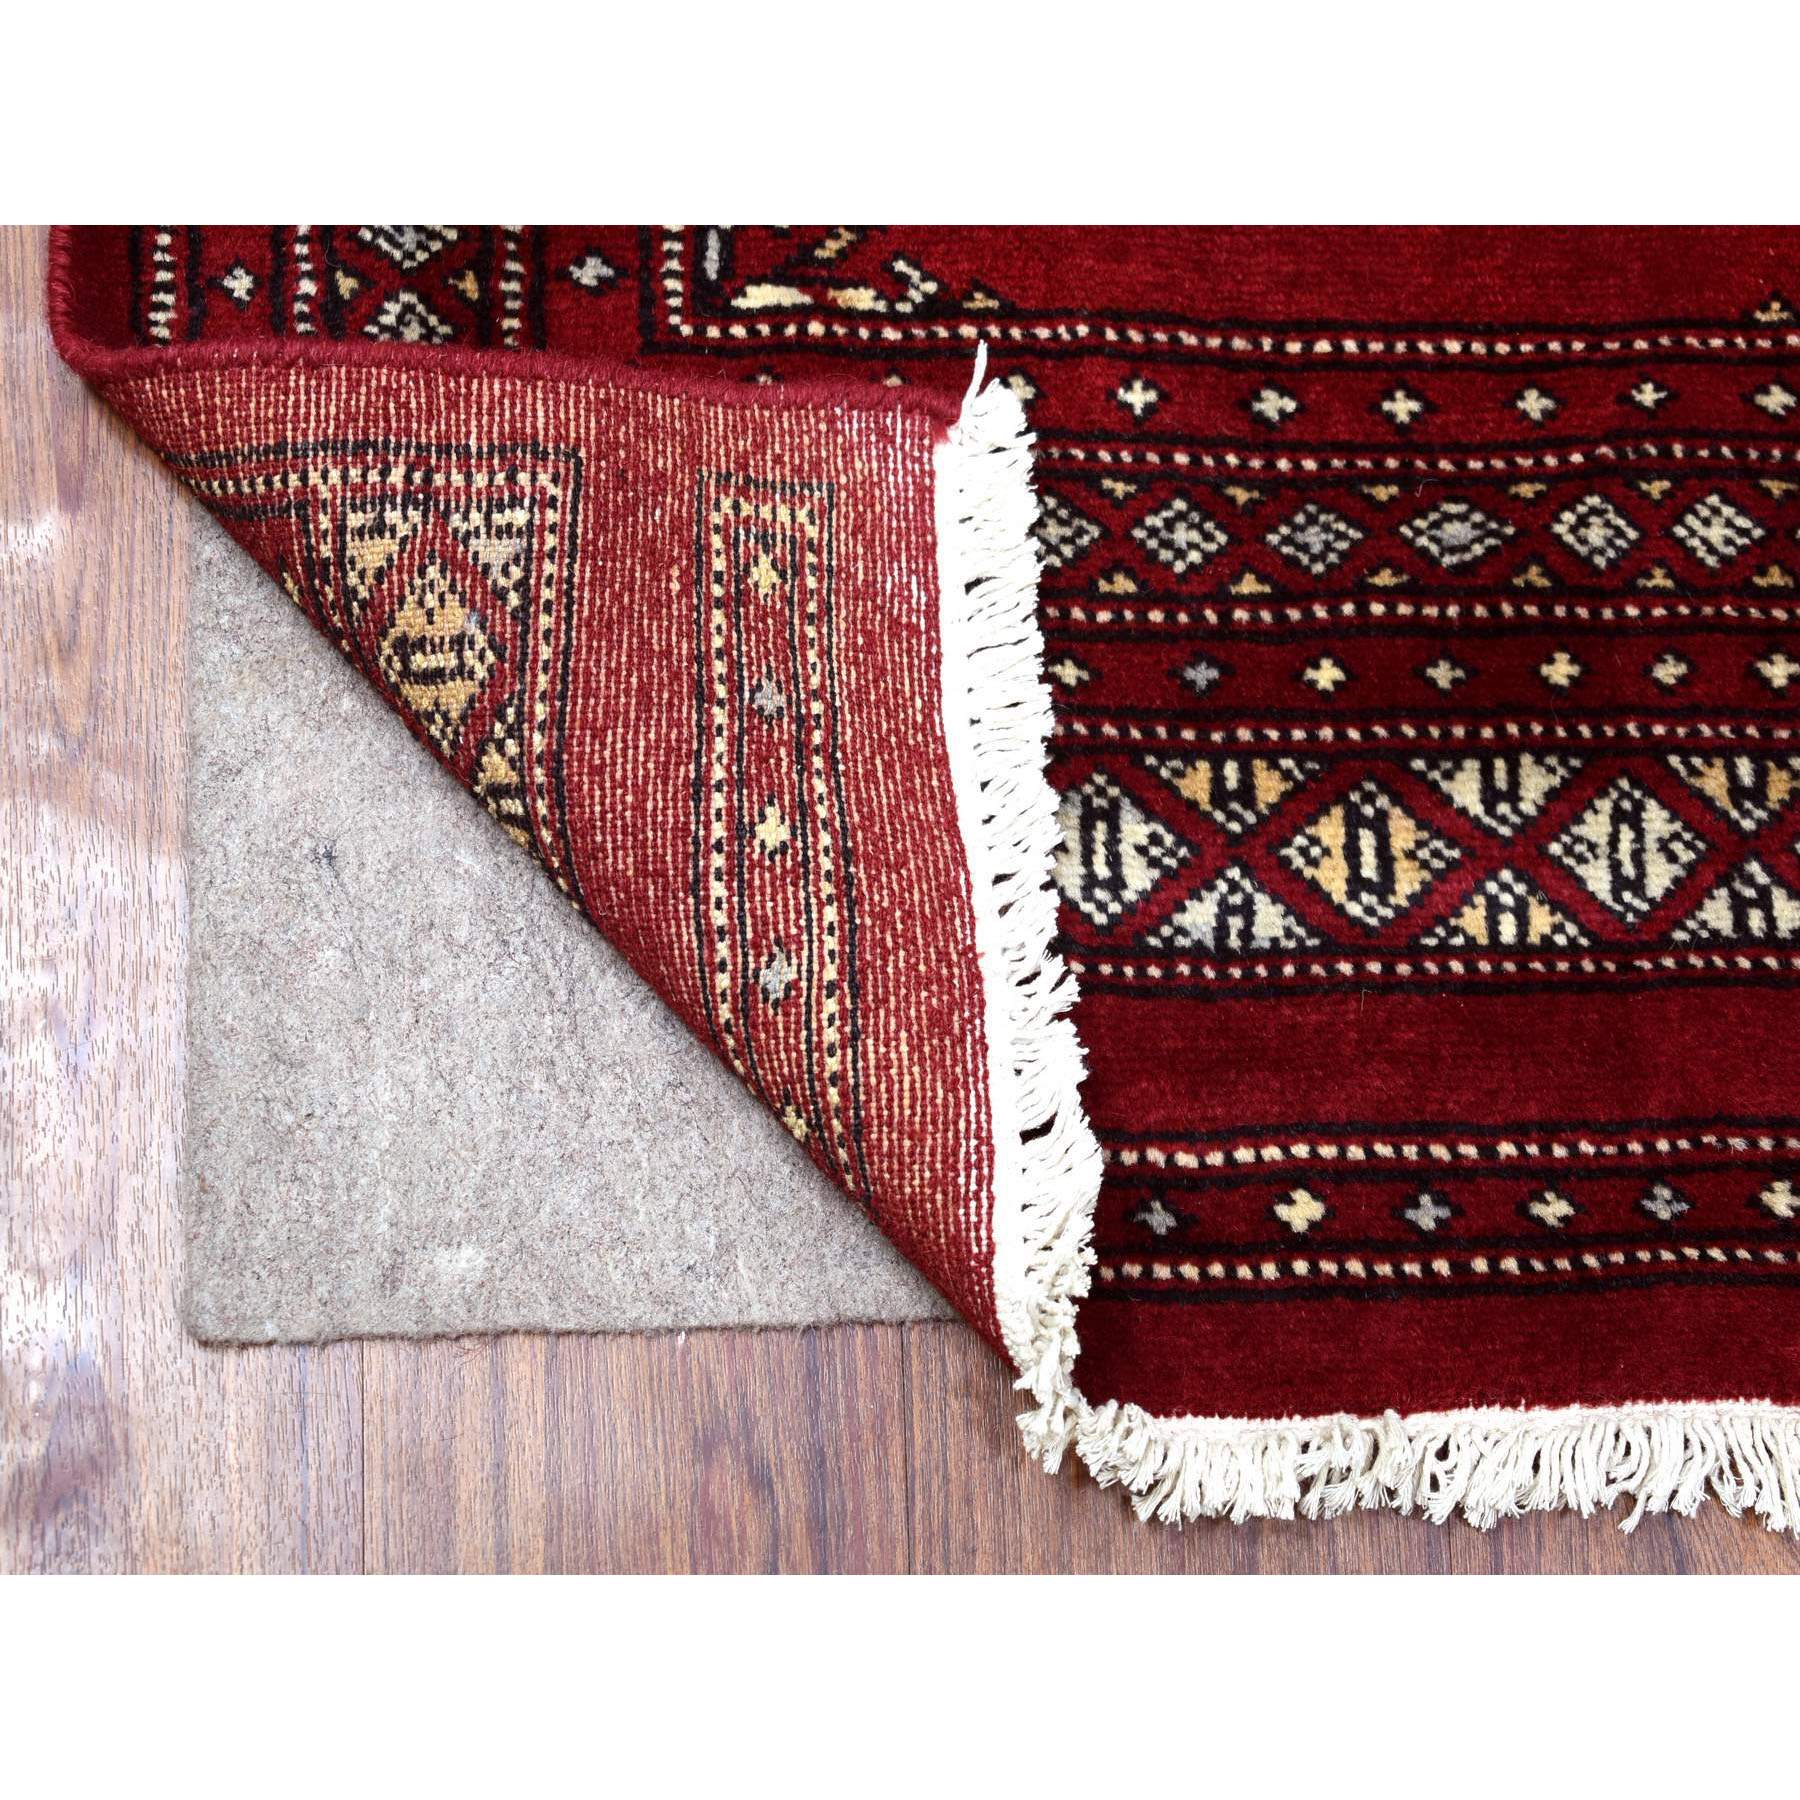 2'6"x9'1" Mori Bokara with Tribal Medallions Design Deep and Rich Red Extra Soft Wool Hand Woven Oriental Runner Rug 